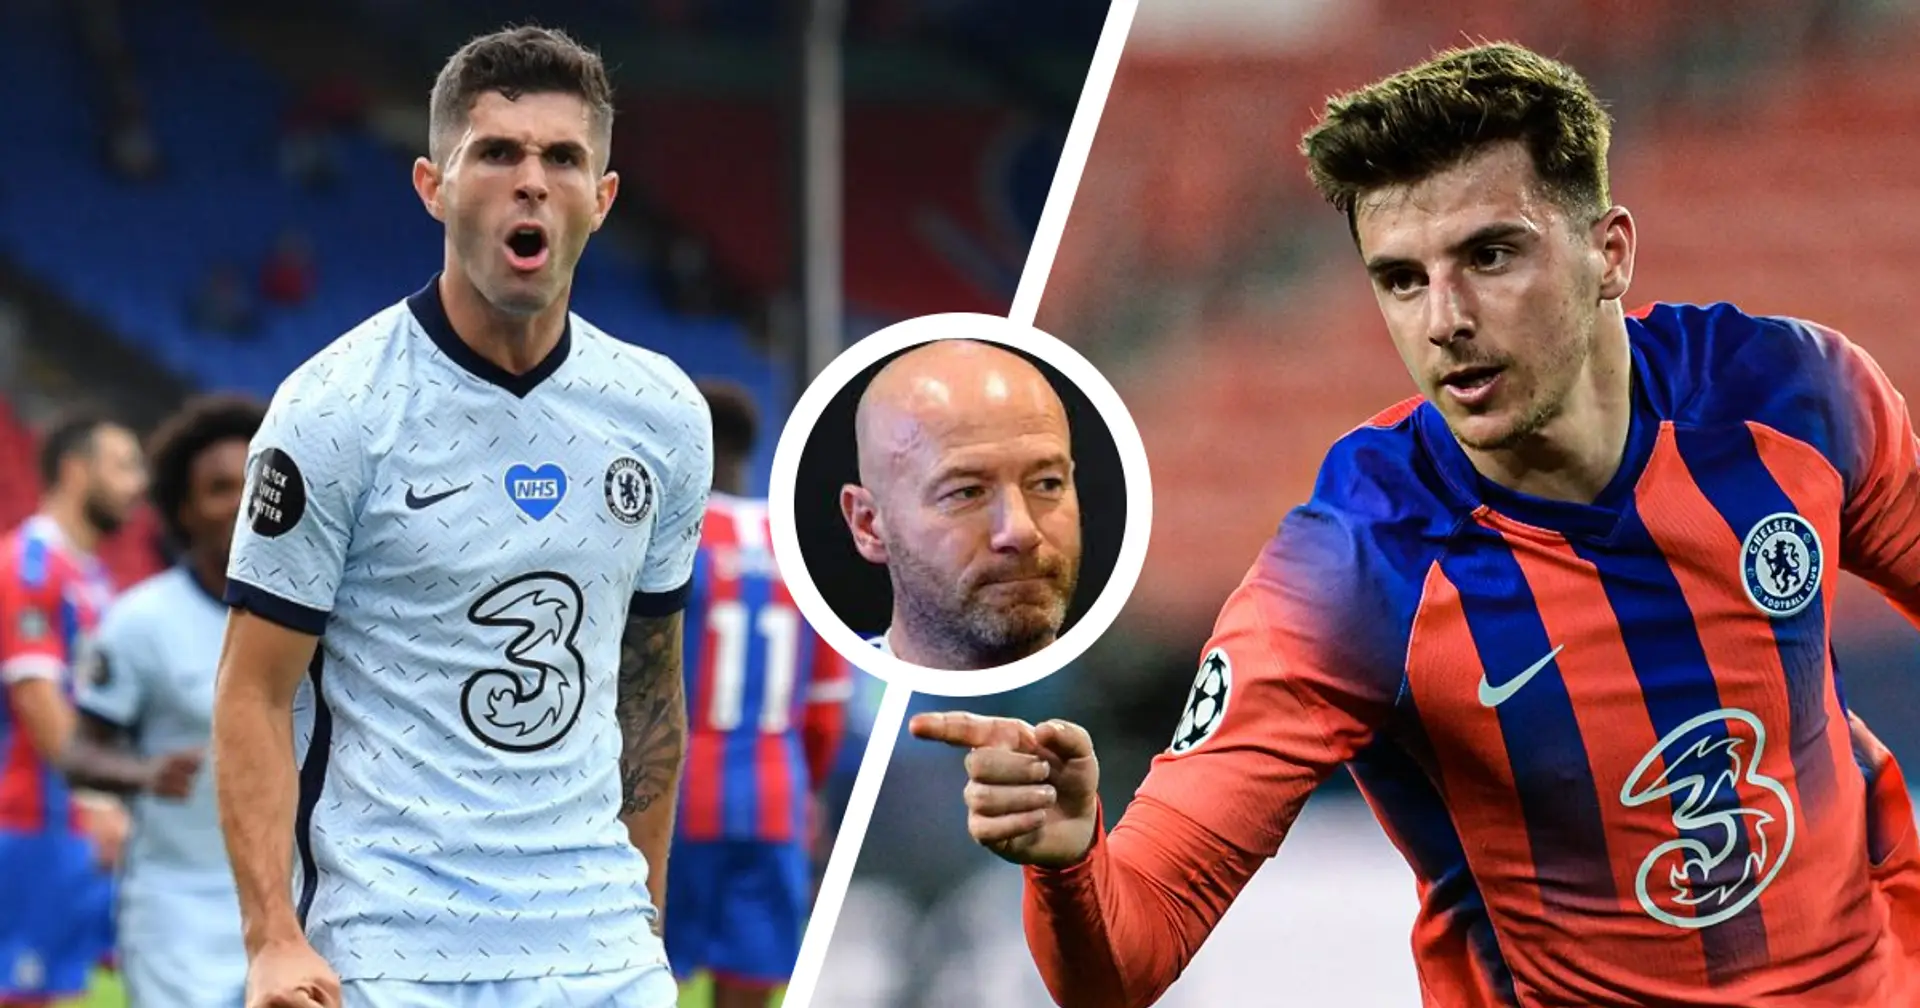 'I thought it was clever team selection': Alan Shearer names 3 players that impressed against Palace